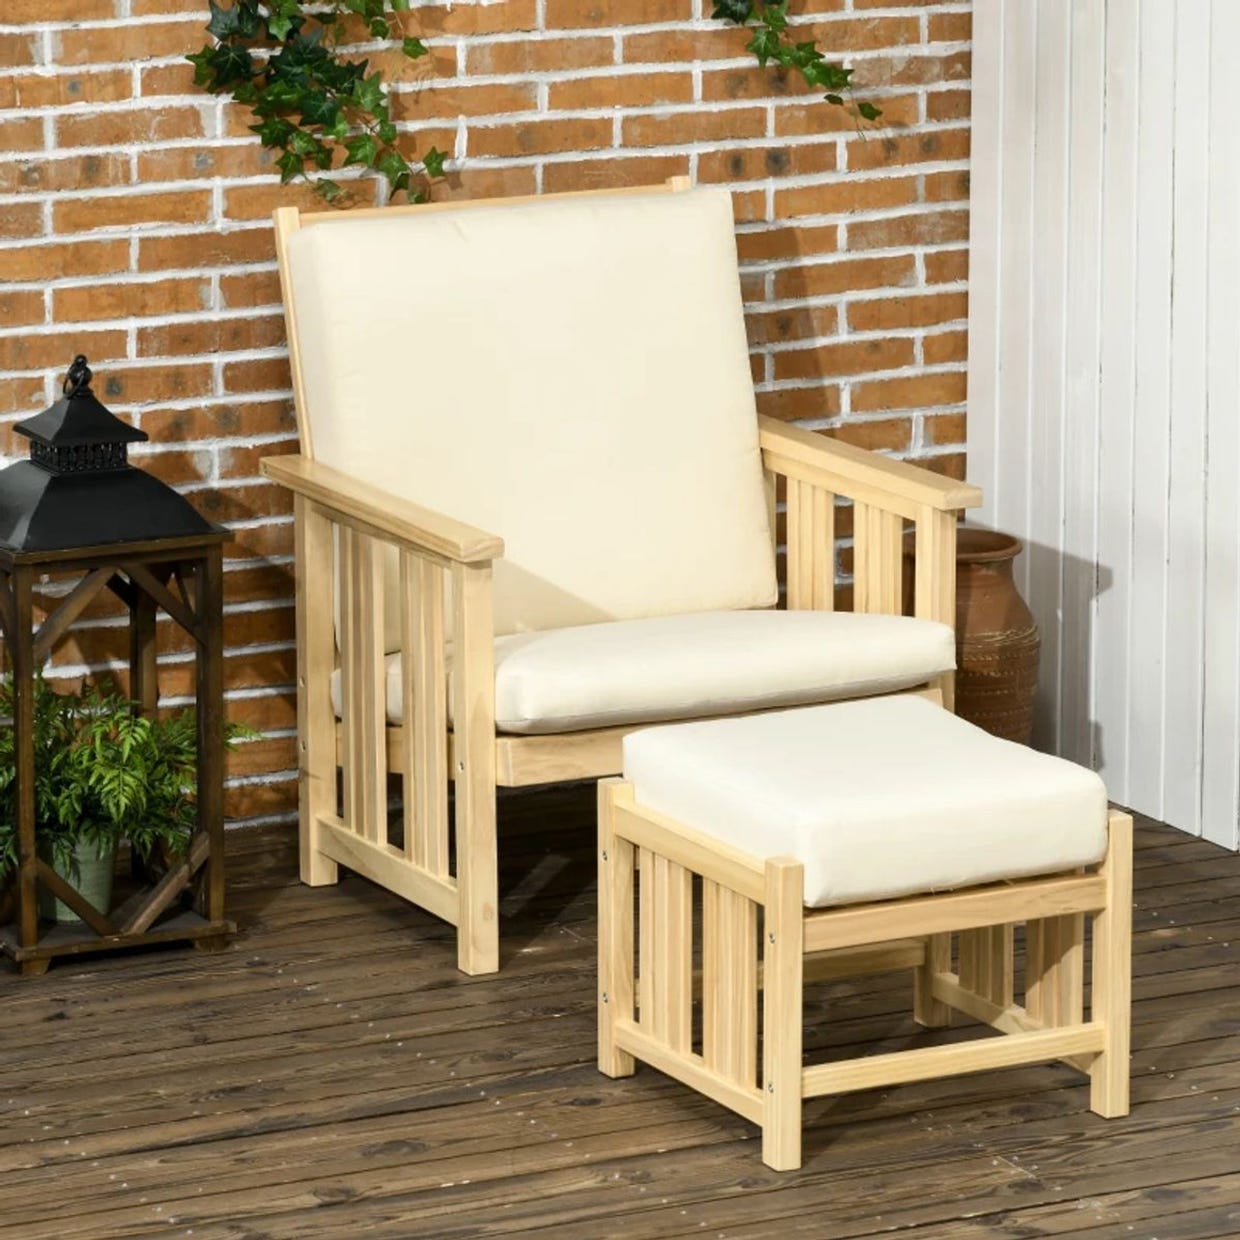 Wooden armchair with an off-white cushion and matching ottoman on a tiled patio floor, against a brick wall backdrop.